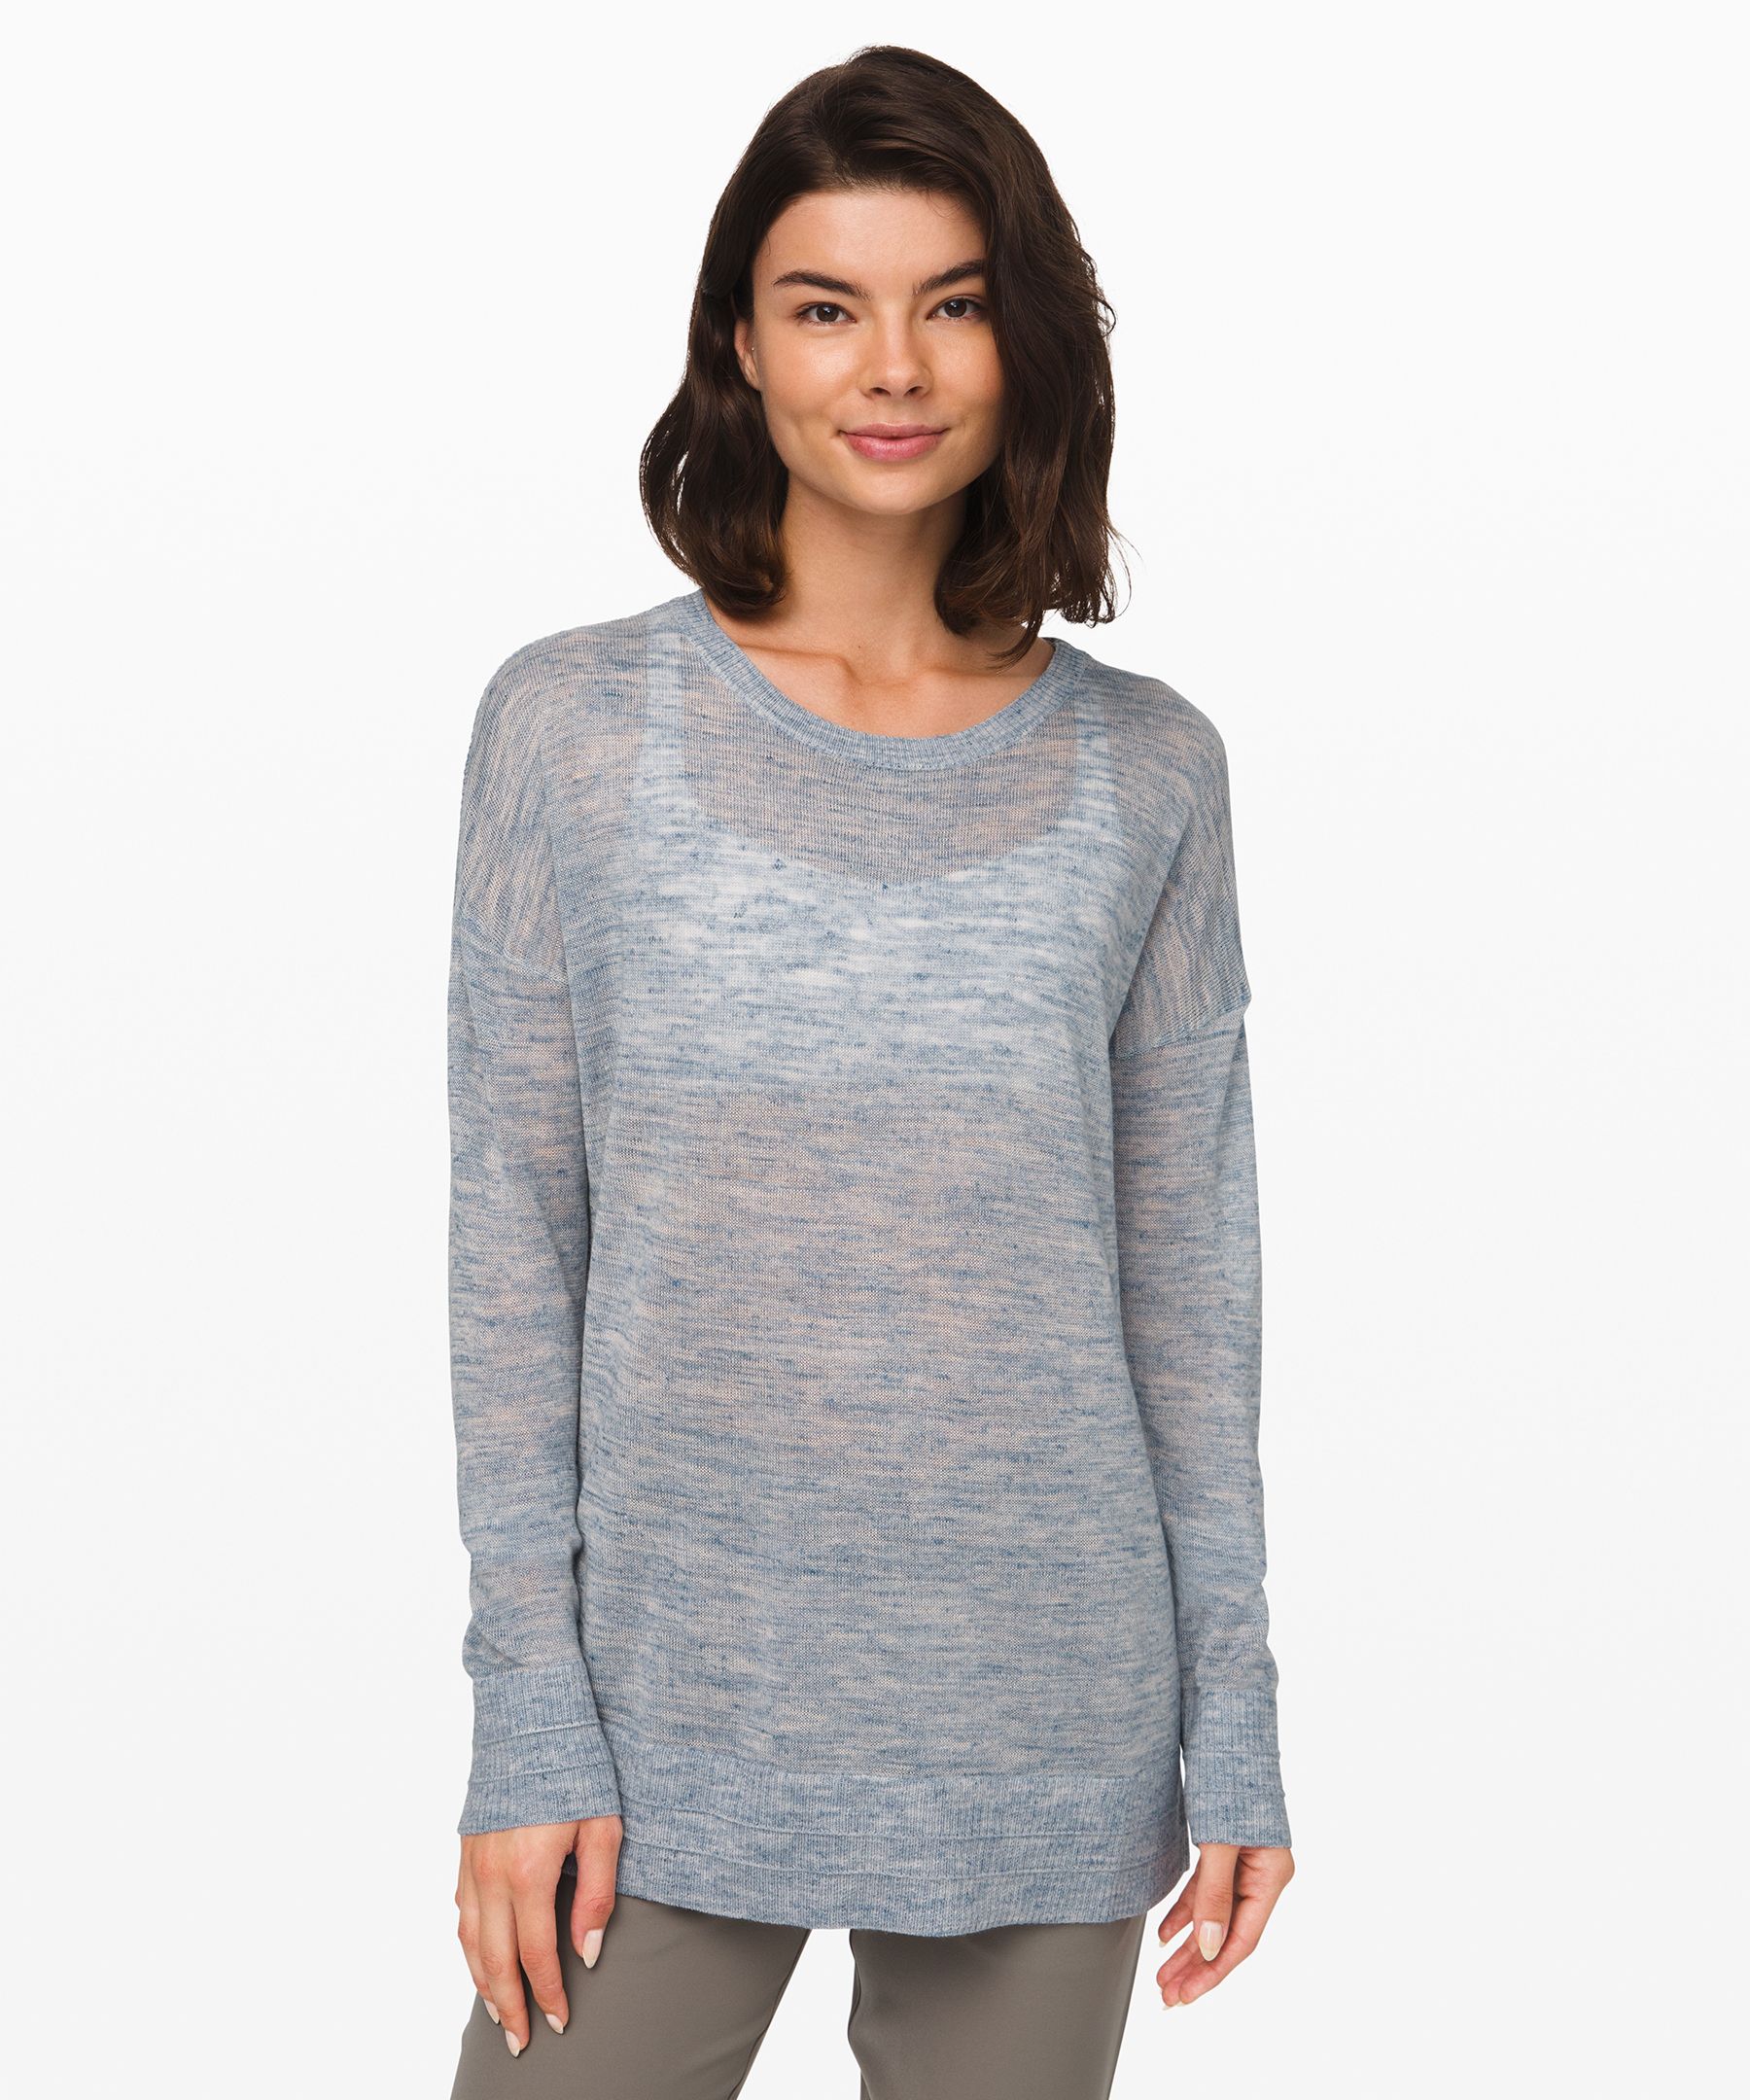 Lululemon Well Being Crew Sweater *linen In Heathered Speckle Petrol Blue